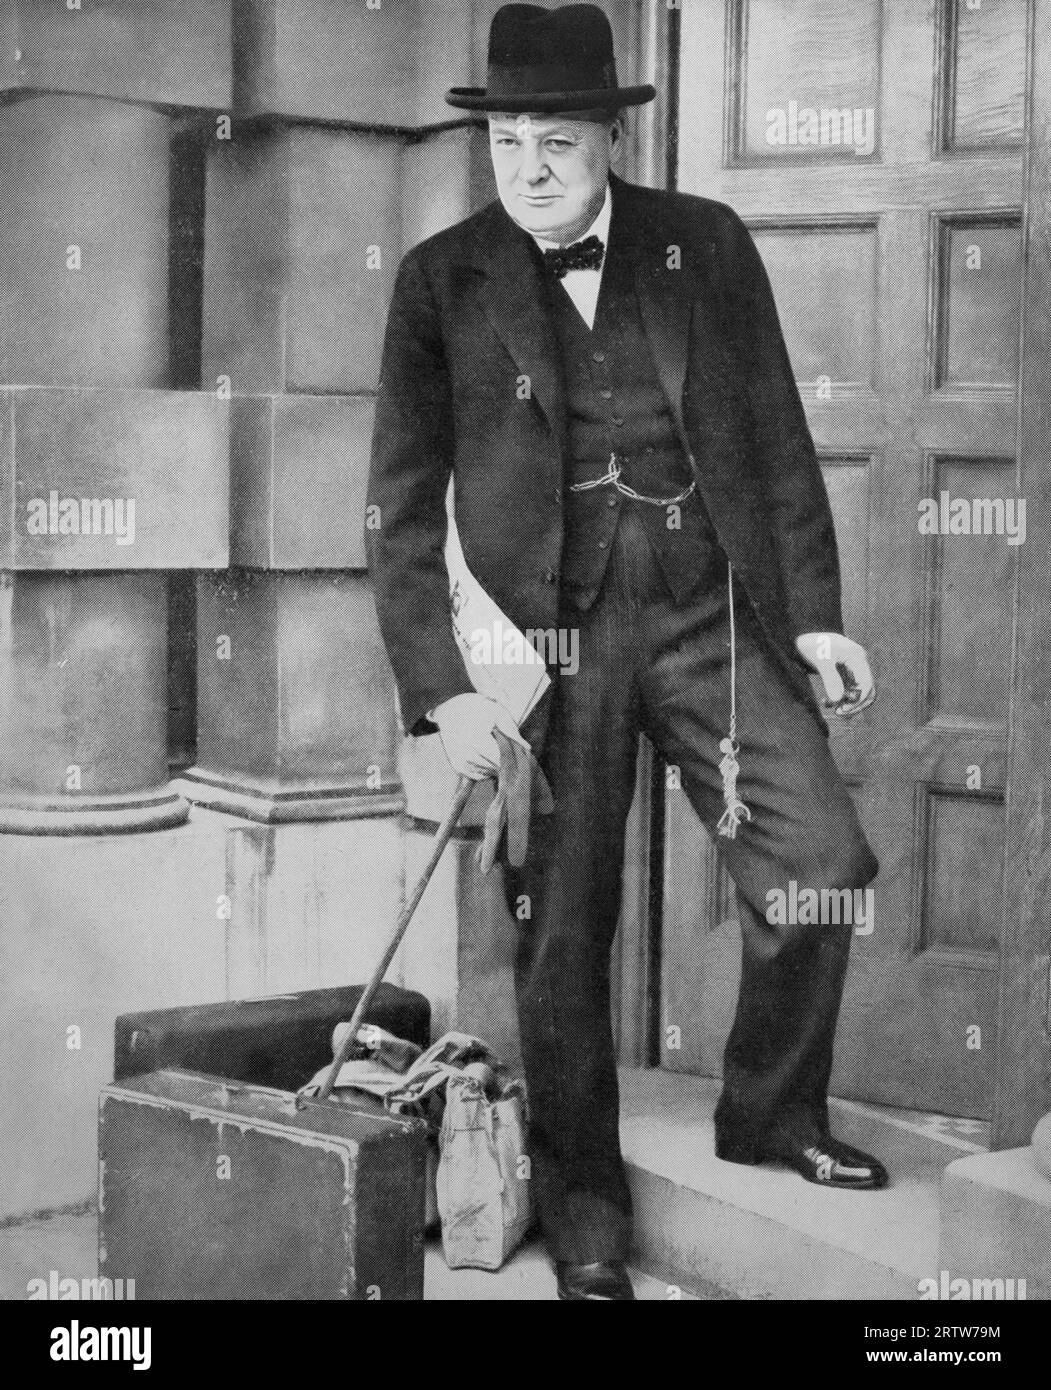 Following the outbreak of the Second World War on the 3rd September 1939, Winston Churchill, appointed First Lord of the Admiralty  pauses on the steps of the Admiralty prior to taking up his new post. Stock Photo